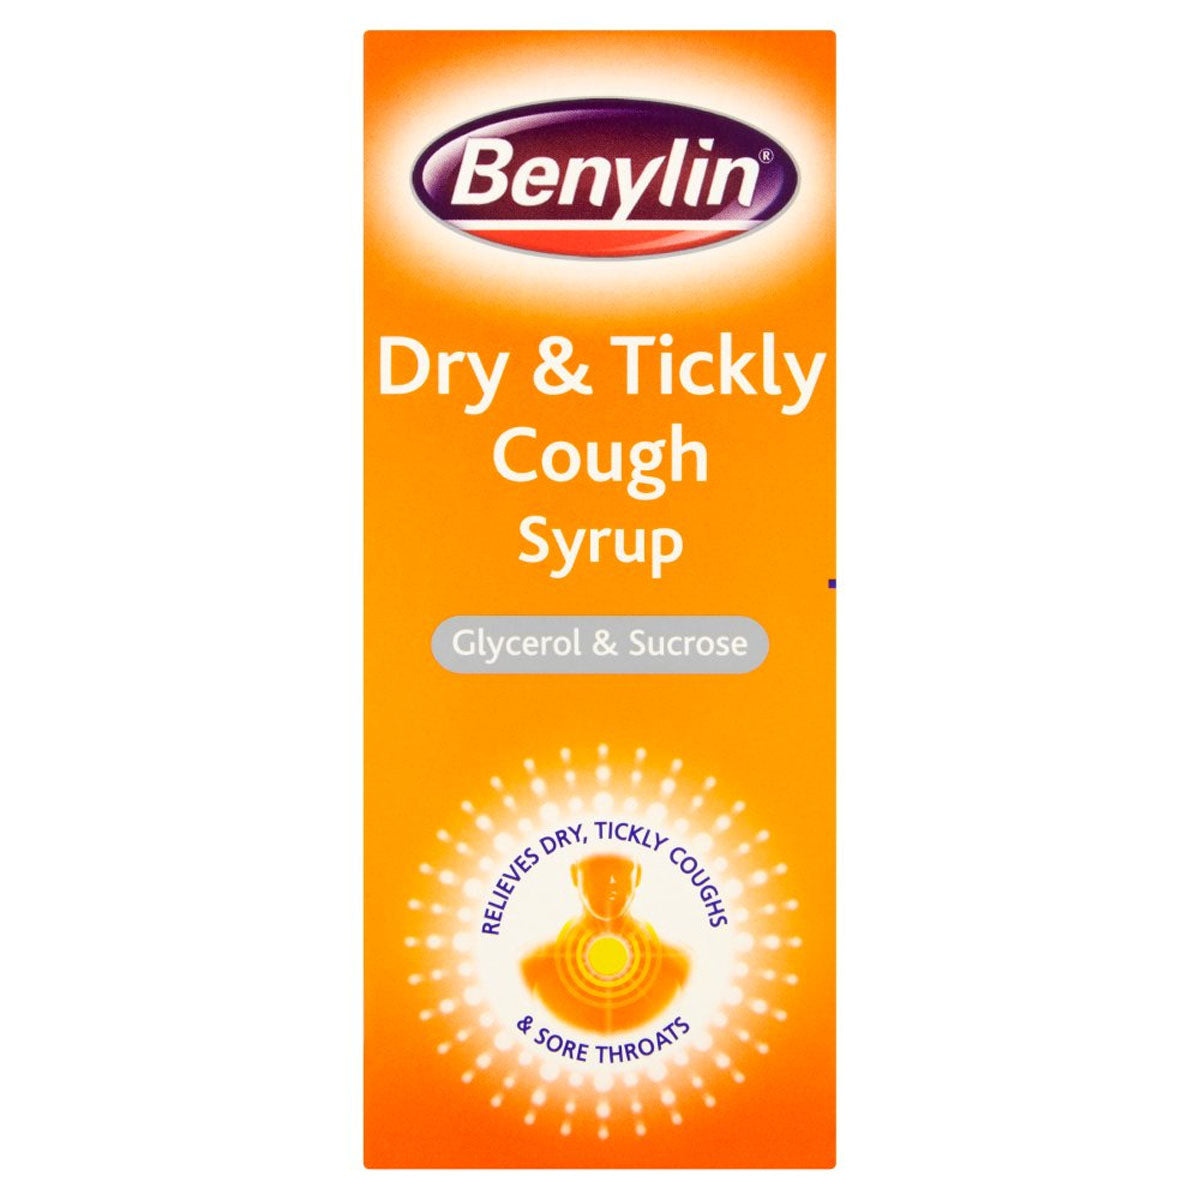 Benylin - Dry & Tickly Cough Syrup - 150ml - Continental Food Store